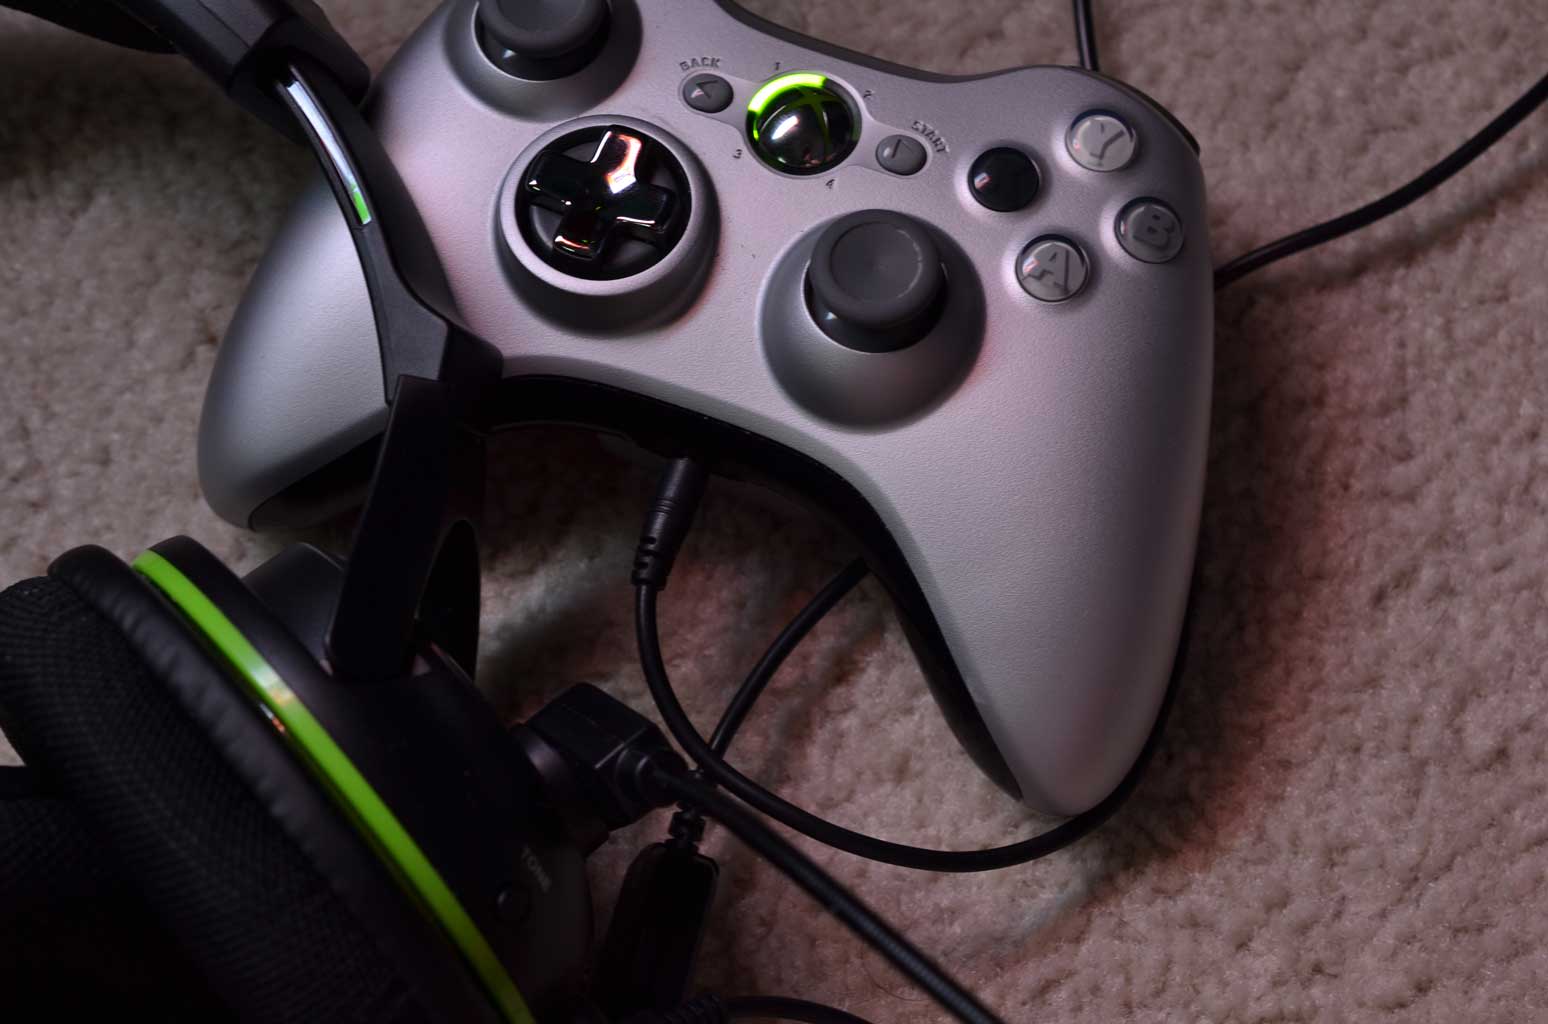 5 Xbox Console Deals That’ll Level-Up Your Gameplay Without Breaking the Bank